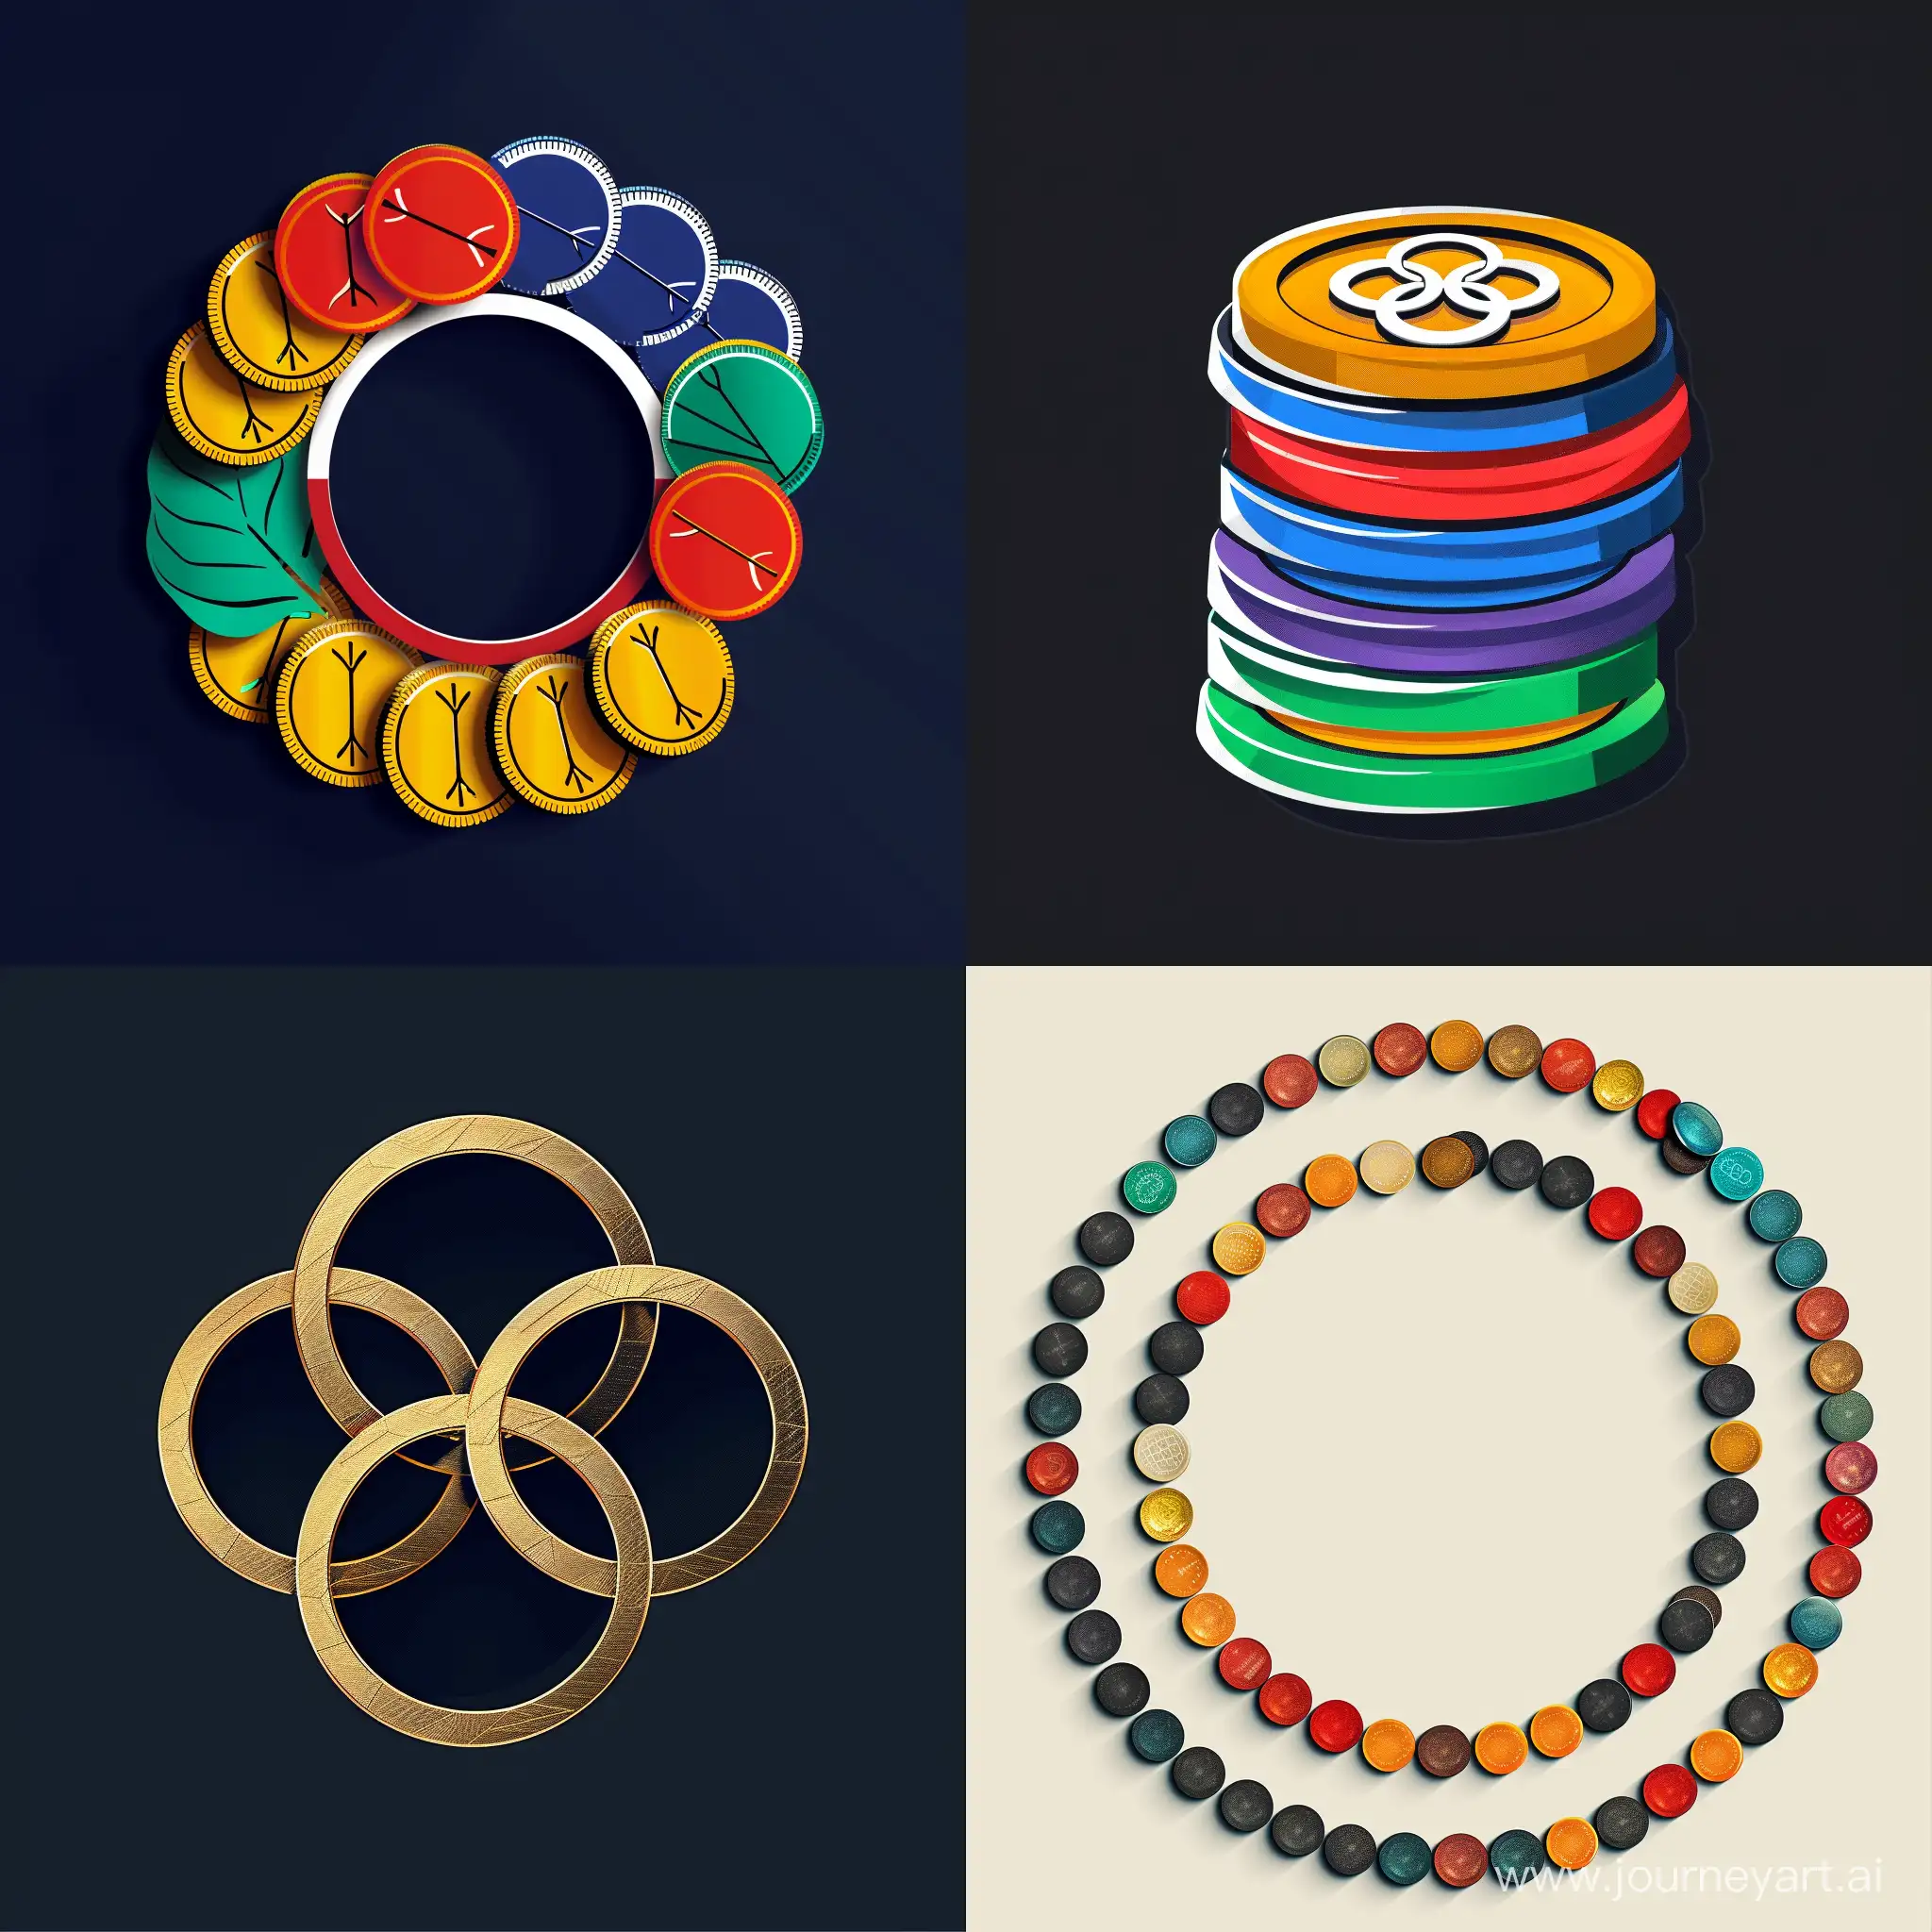 create a minimalist logo of casino coins that represent olympic ring